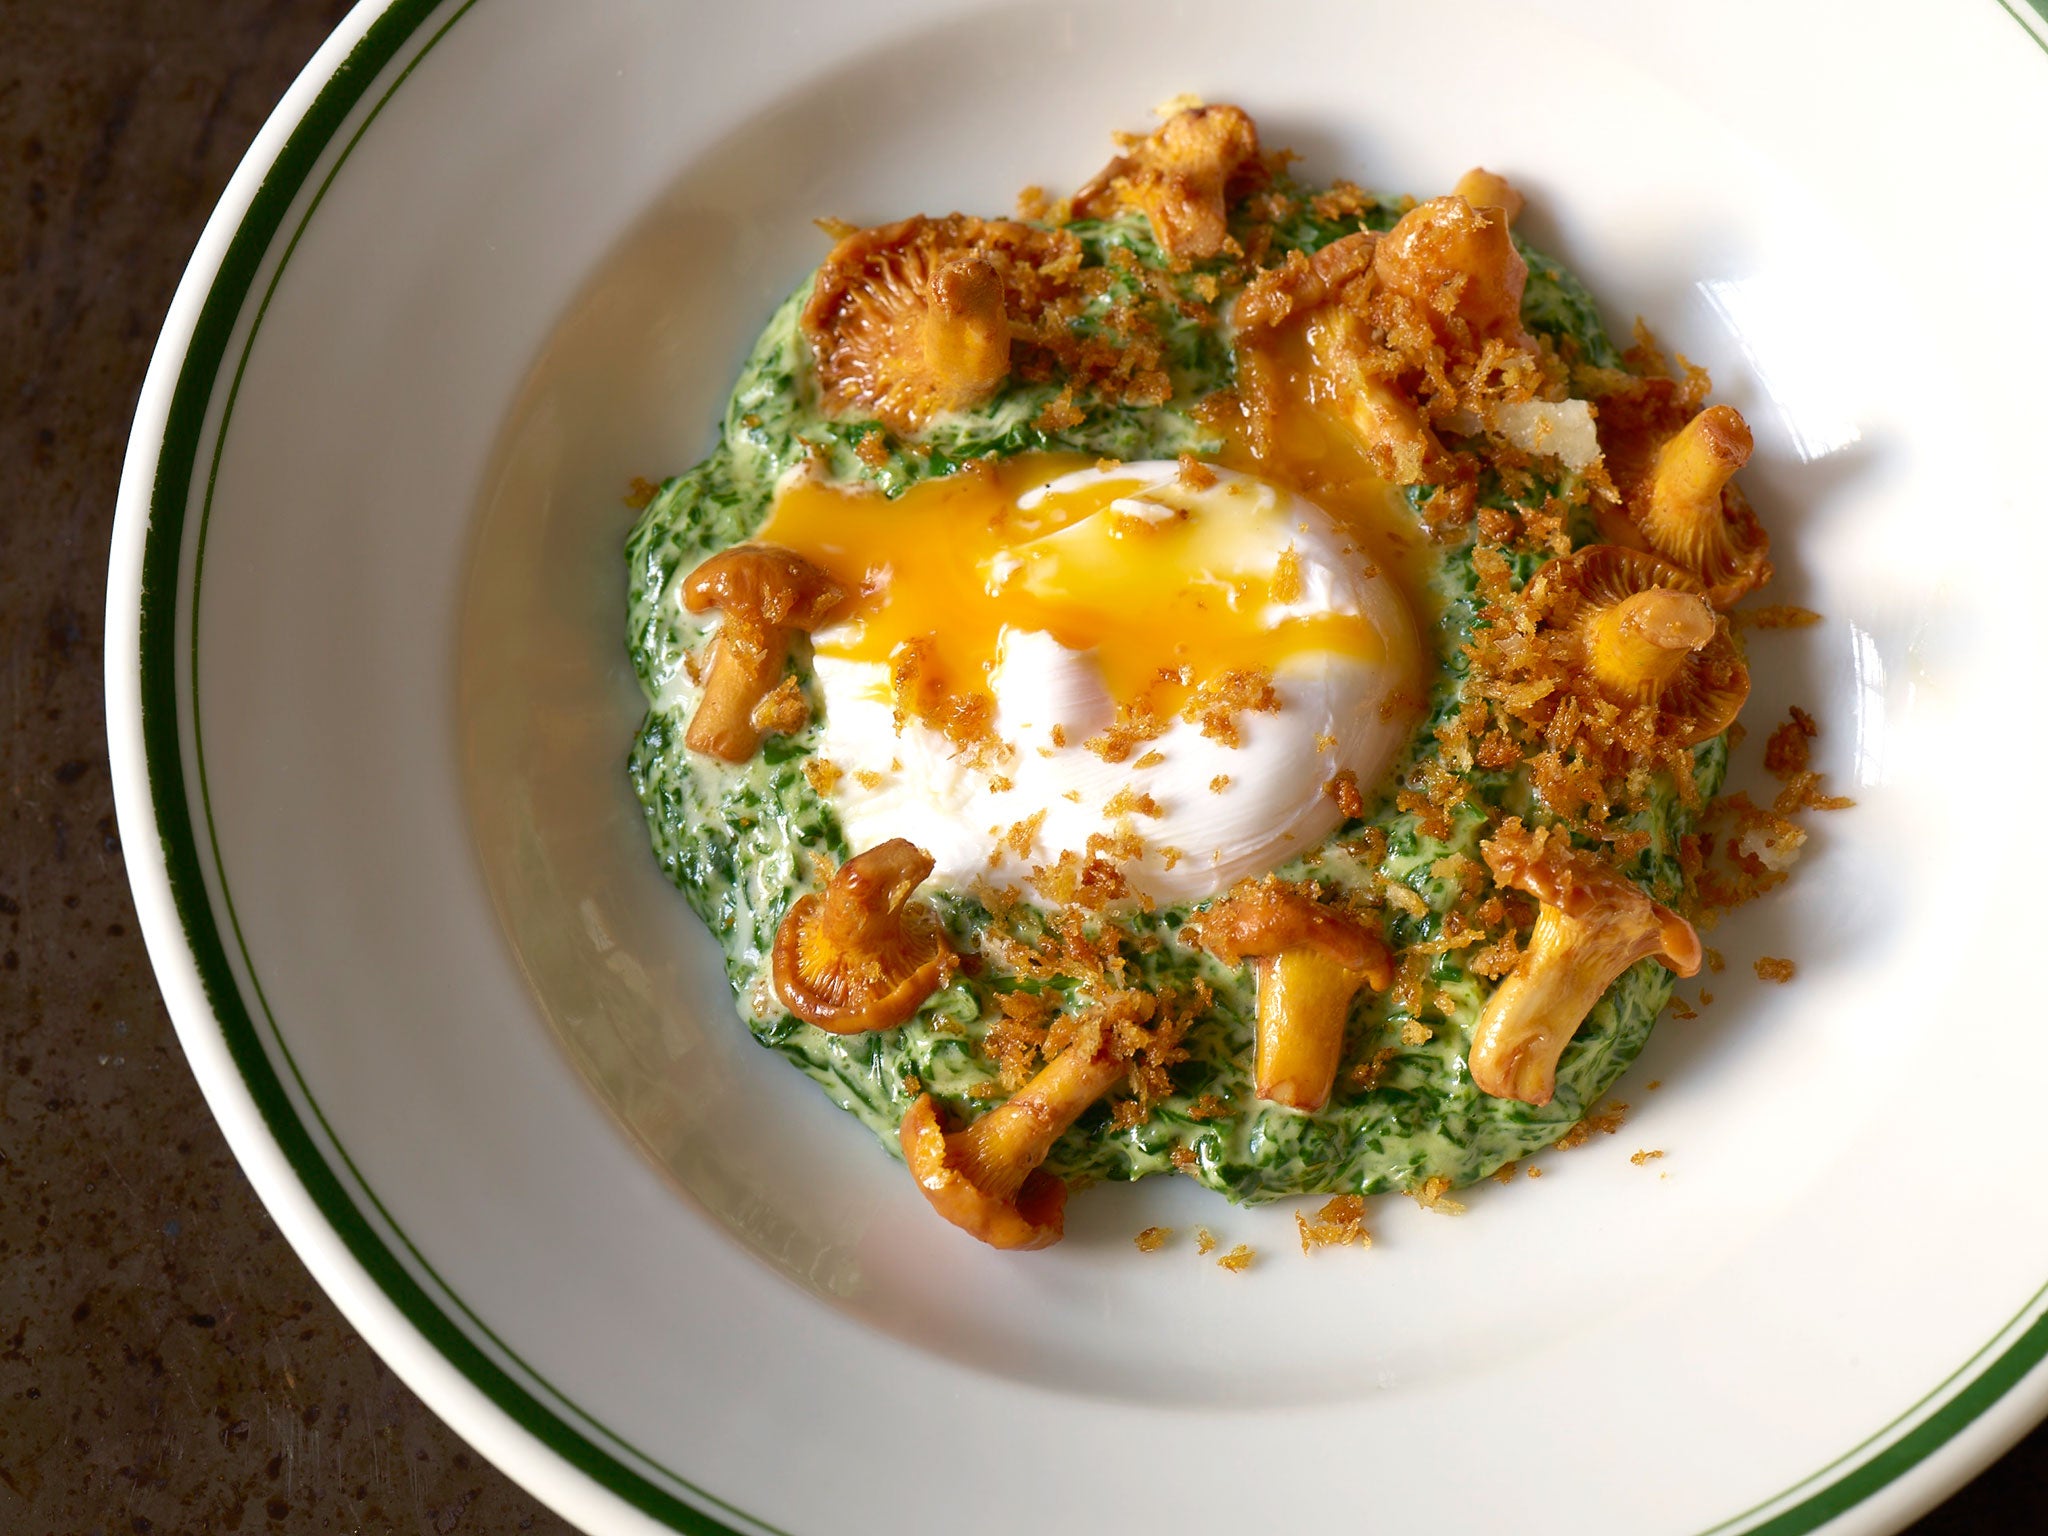 Poached duck egg with creamed spinach and wild mushrooms